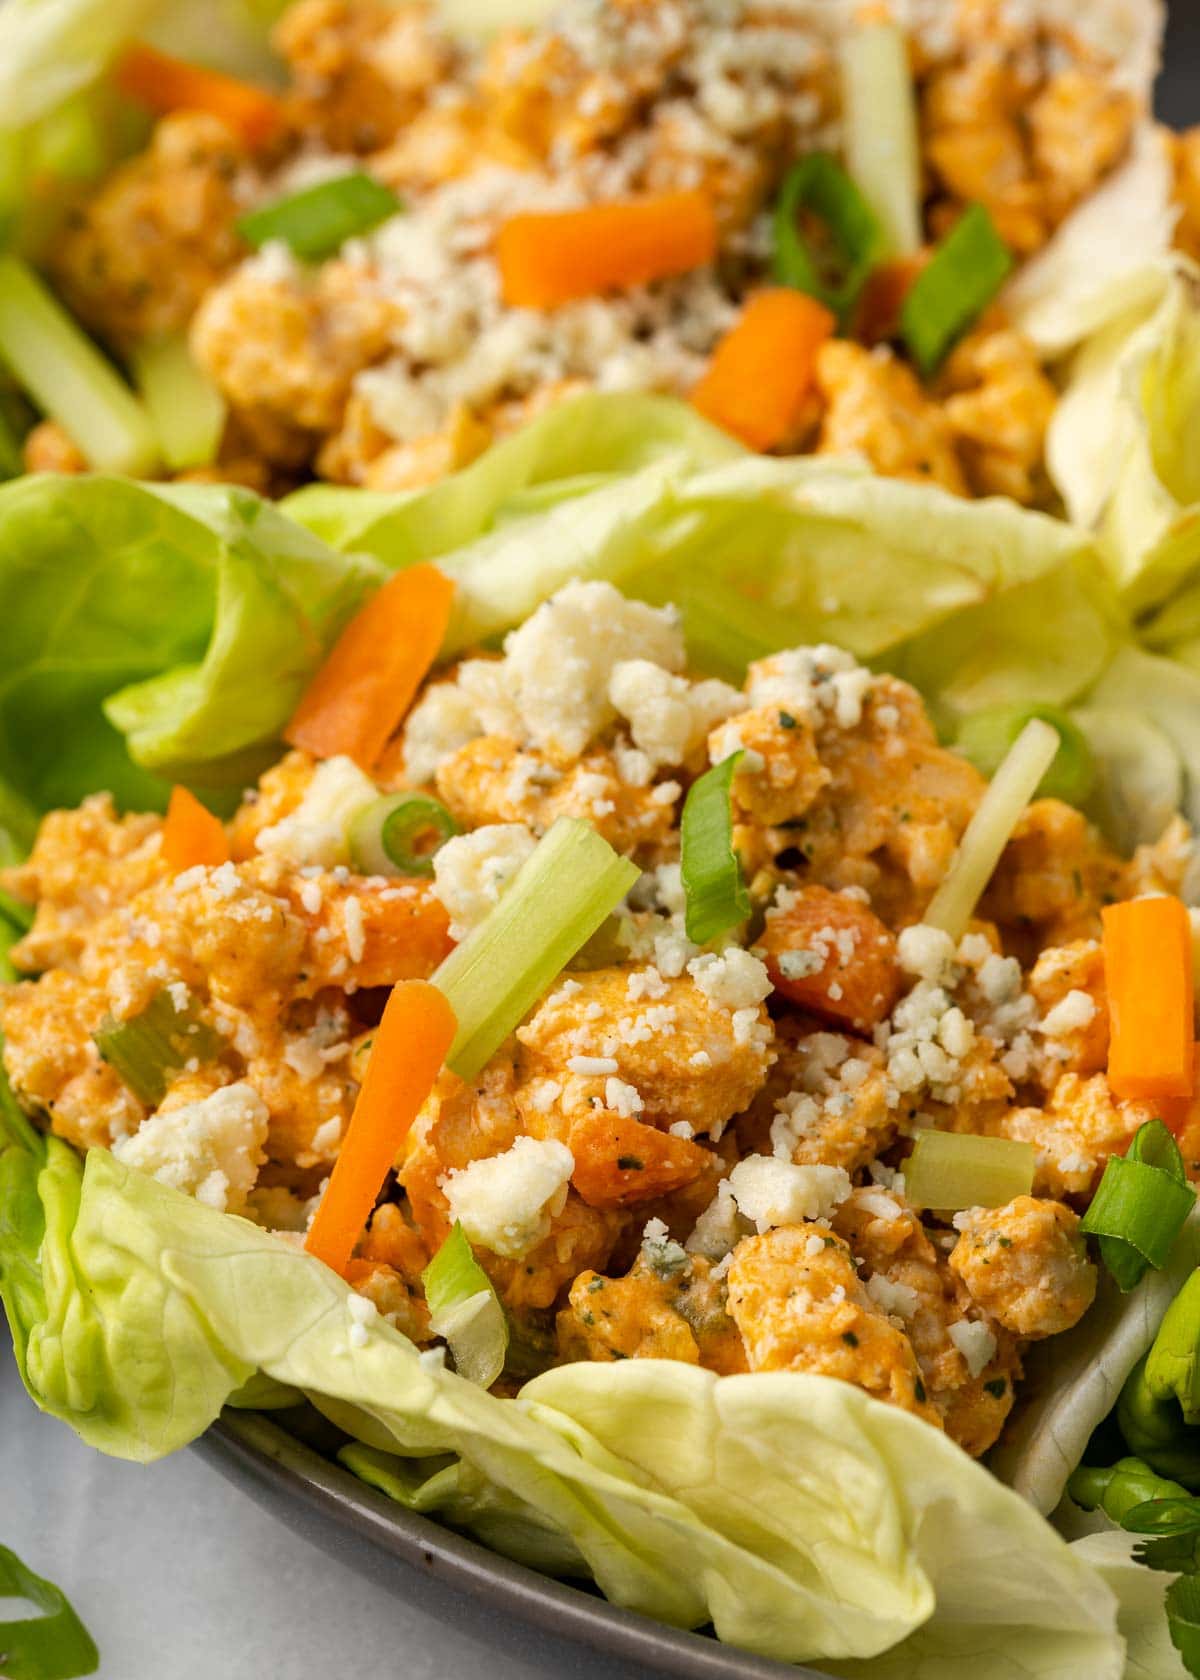 These easy Buffalo Chicken Lettuce Wraps make the best low-carb lunch! This super flavorful recipe is naturally keto-friendly, gluten-free, healthy, and easy to make ahead of time.